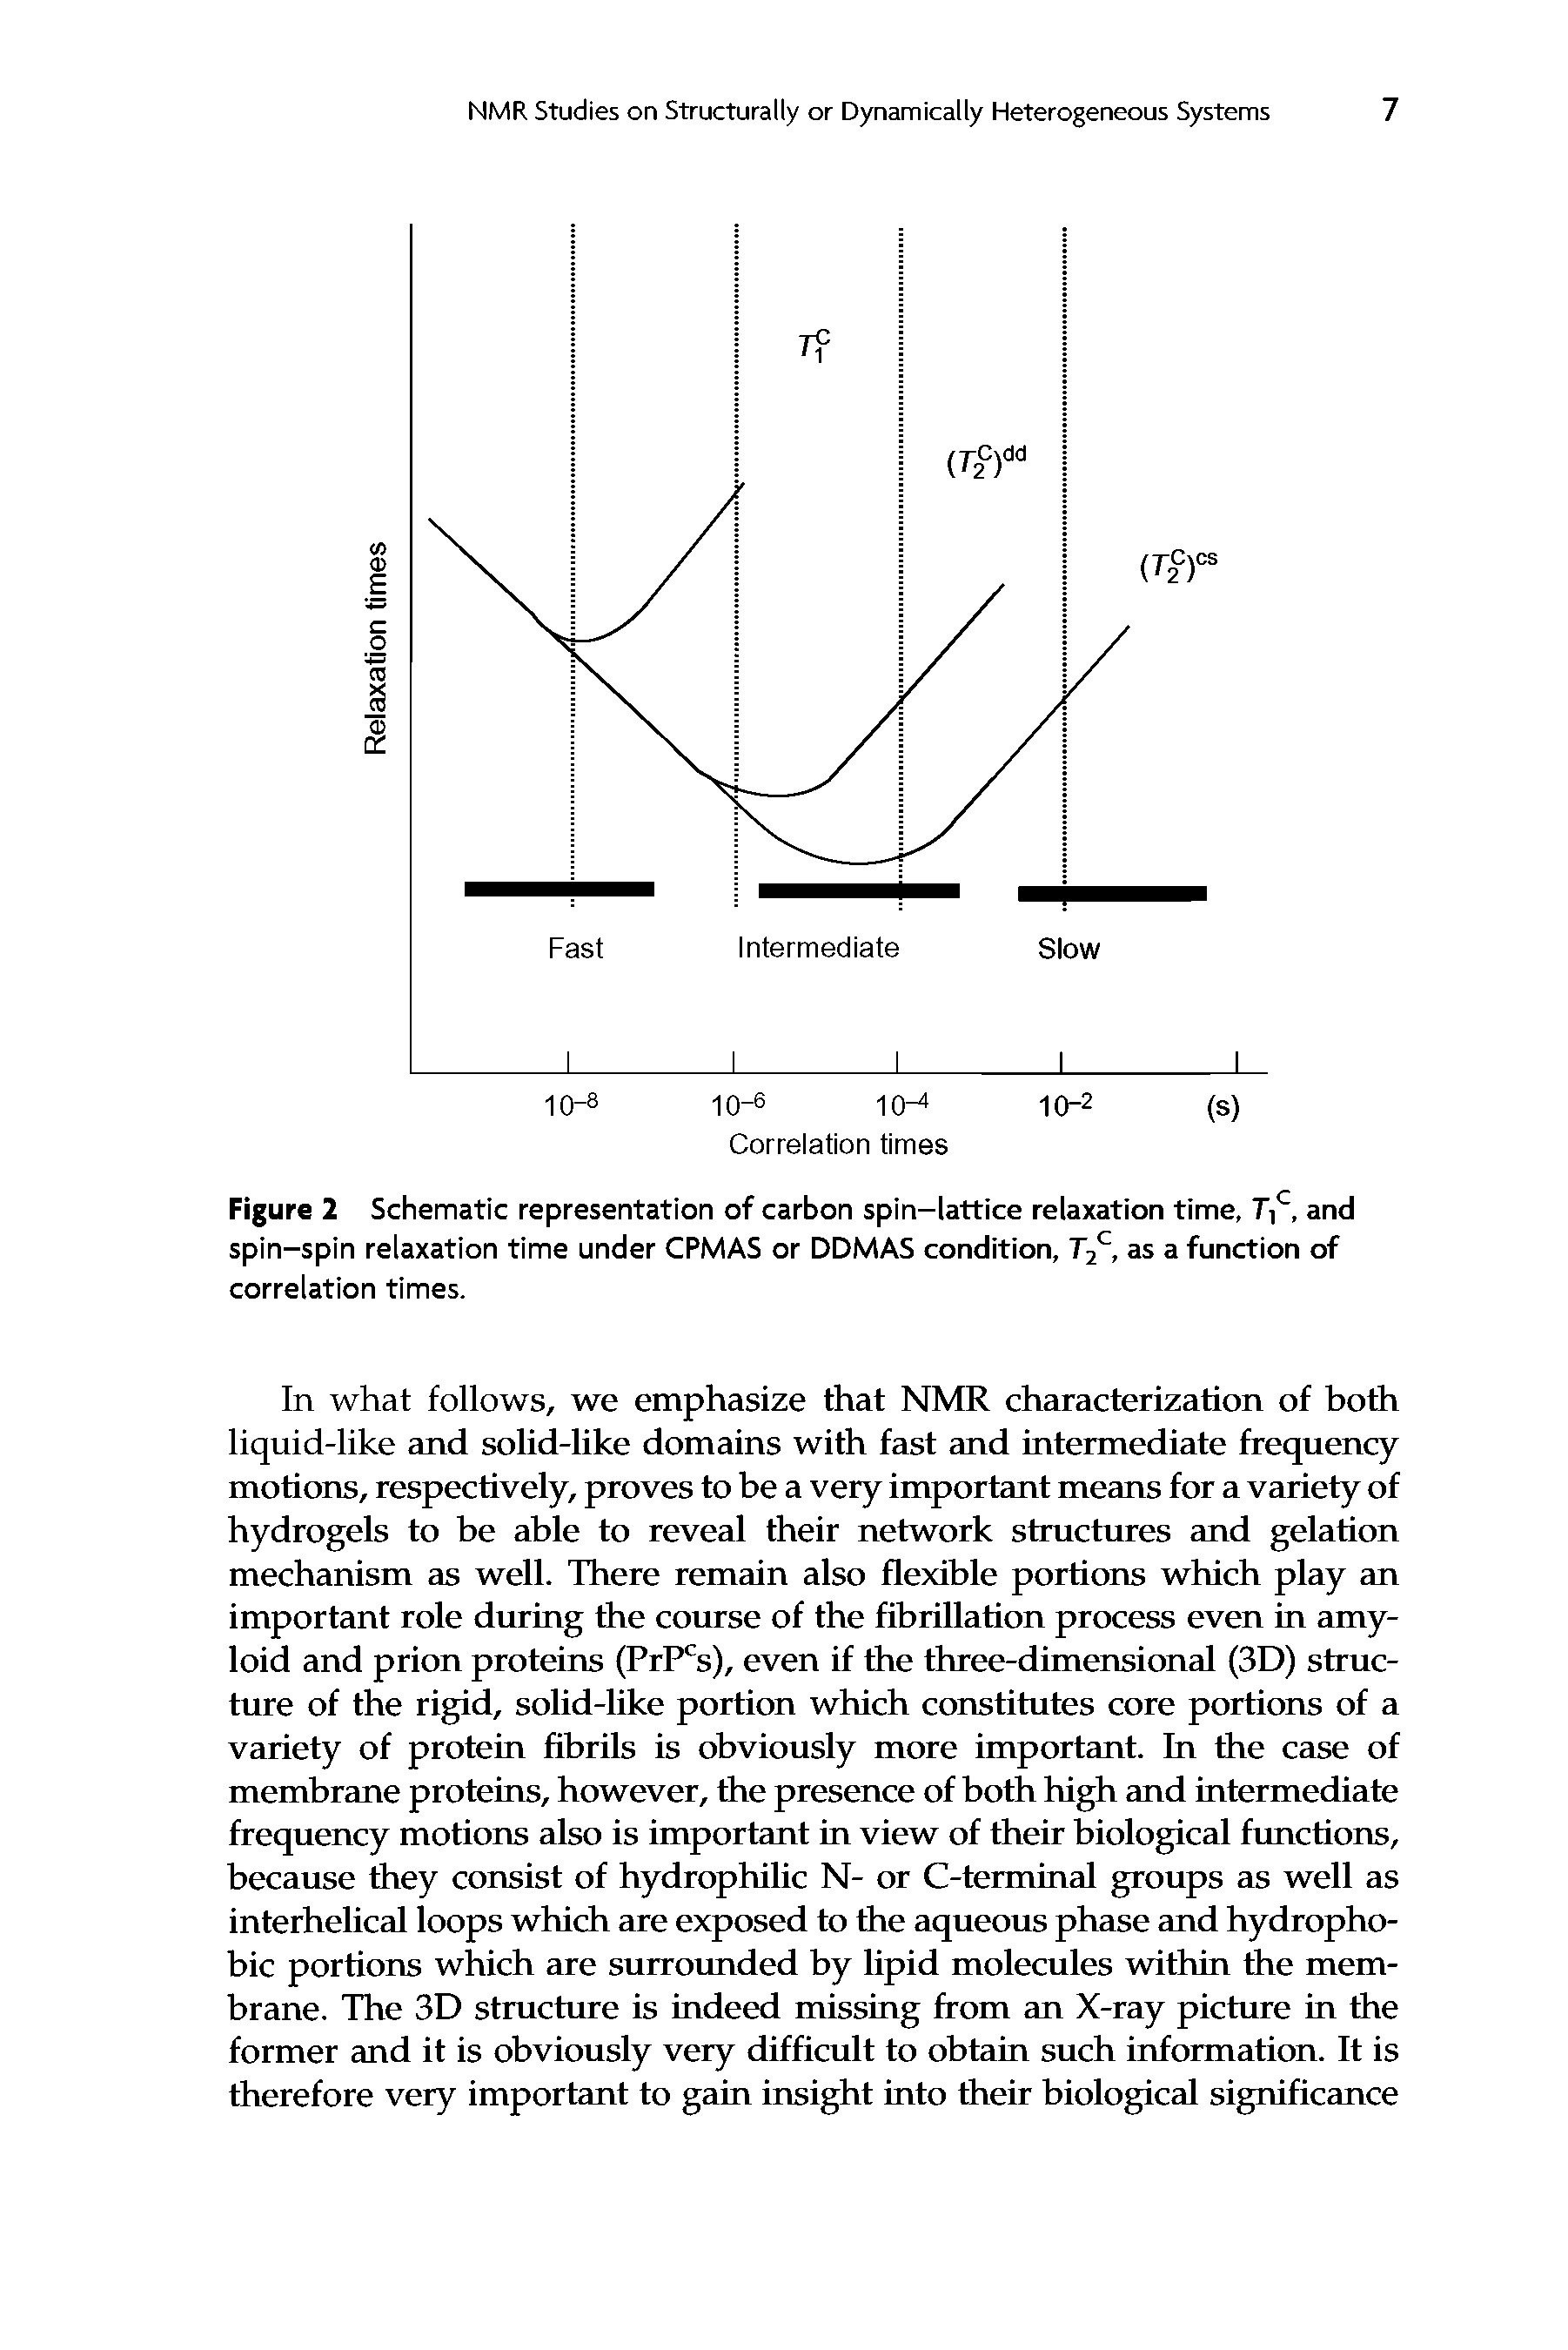 Figure 2 Schematic representation of carbon spin-lattice relaxation time, T,c, and spin-spin relaxation time under CPMAS or DDMAS condition, T2C, as a function of correlation times.